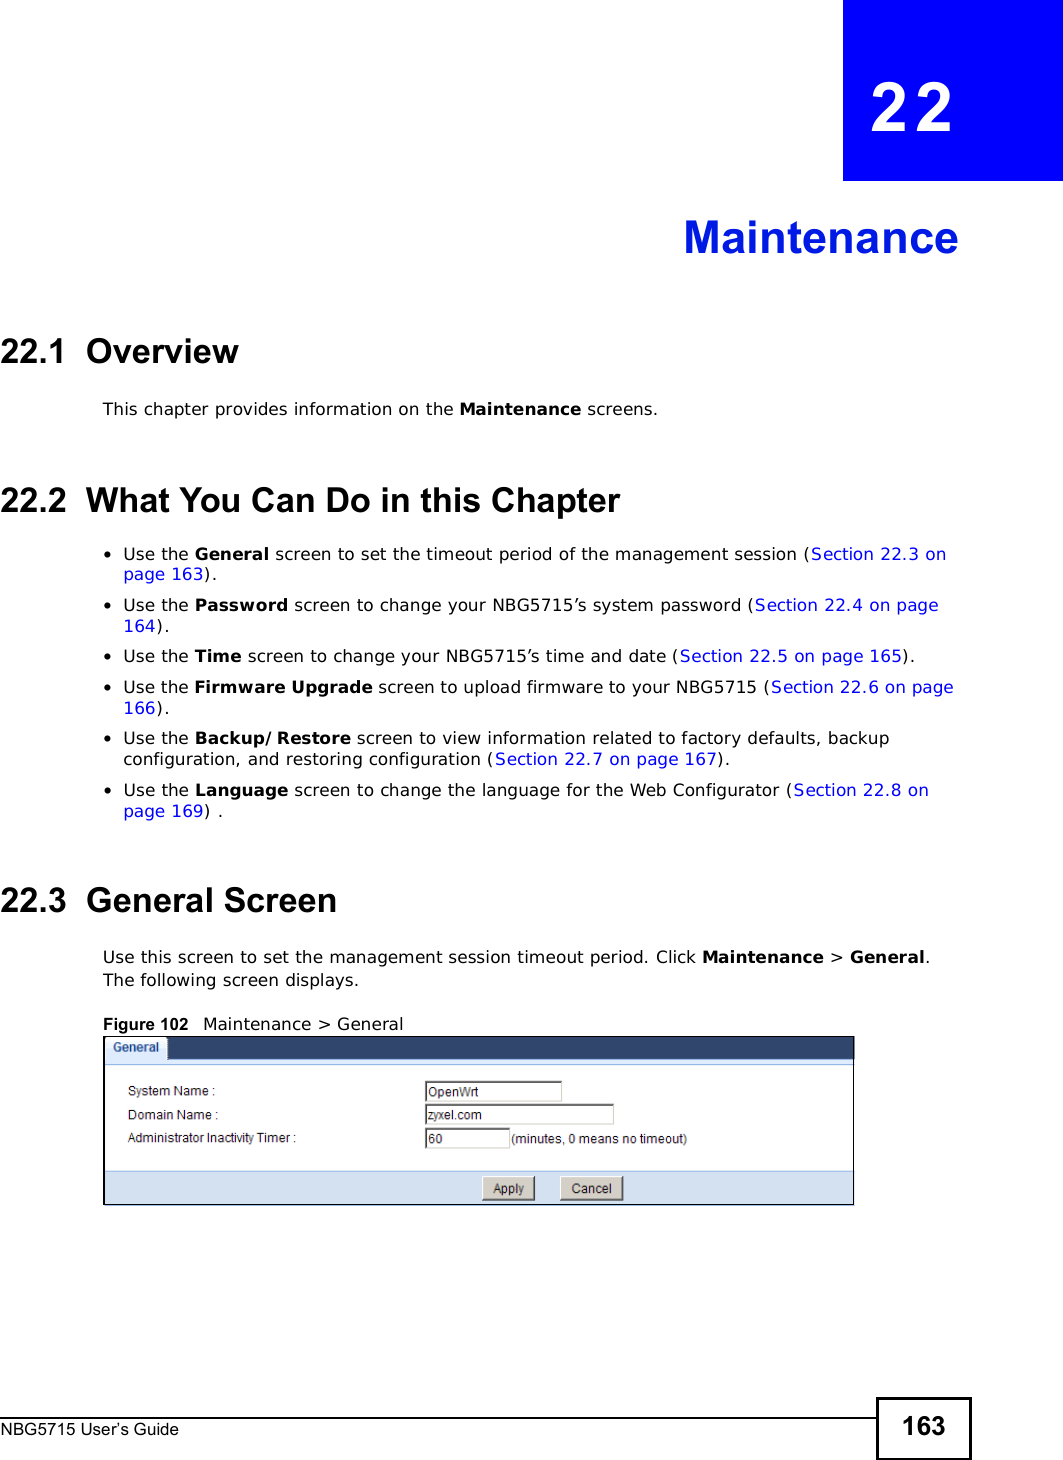 NBG5715 User’s Guide 163CHAPTER   22Maintenance22.1  OverviewThis chapter provides information on the Maintenance screens. 22.2  What You Can Do in this Chapter•Use the General screen to set the timeout period of the management session (Section 22.3 on page 163).•Use the Password screen to change your NBG5715’s system password (Section 22.4 on page 164).•Use the Time screen to change your NBG5715’s time and date (Section 22.5 on page 165).•Use the Firmware Upgrade screen to upload firmware to your NBG5715 (Section 22.6 on page 166).•Use the Backup/Restore screen to view information related to factory defaults, backup configuration, and restoring configuration (Section 22.7 on page 167).•Use the Language screen to change the language for the Web Configurator (Section 22.8 on page 169) .22.3  General Screen Use this screen to set the management session timeout period. Click Maintenance &gt; General.The following screen displays.Figure 102   Maintenance &gt; General 